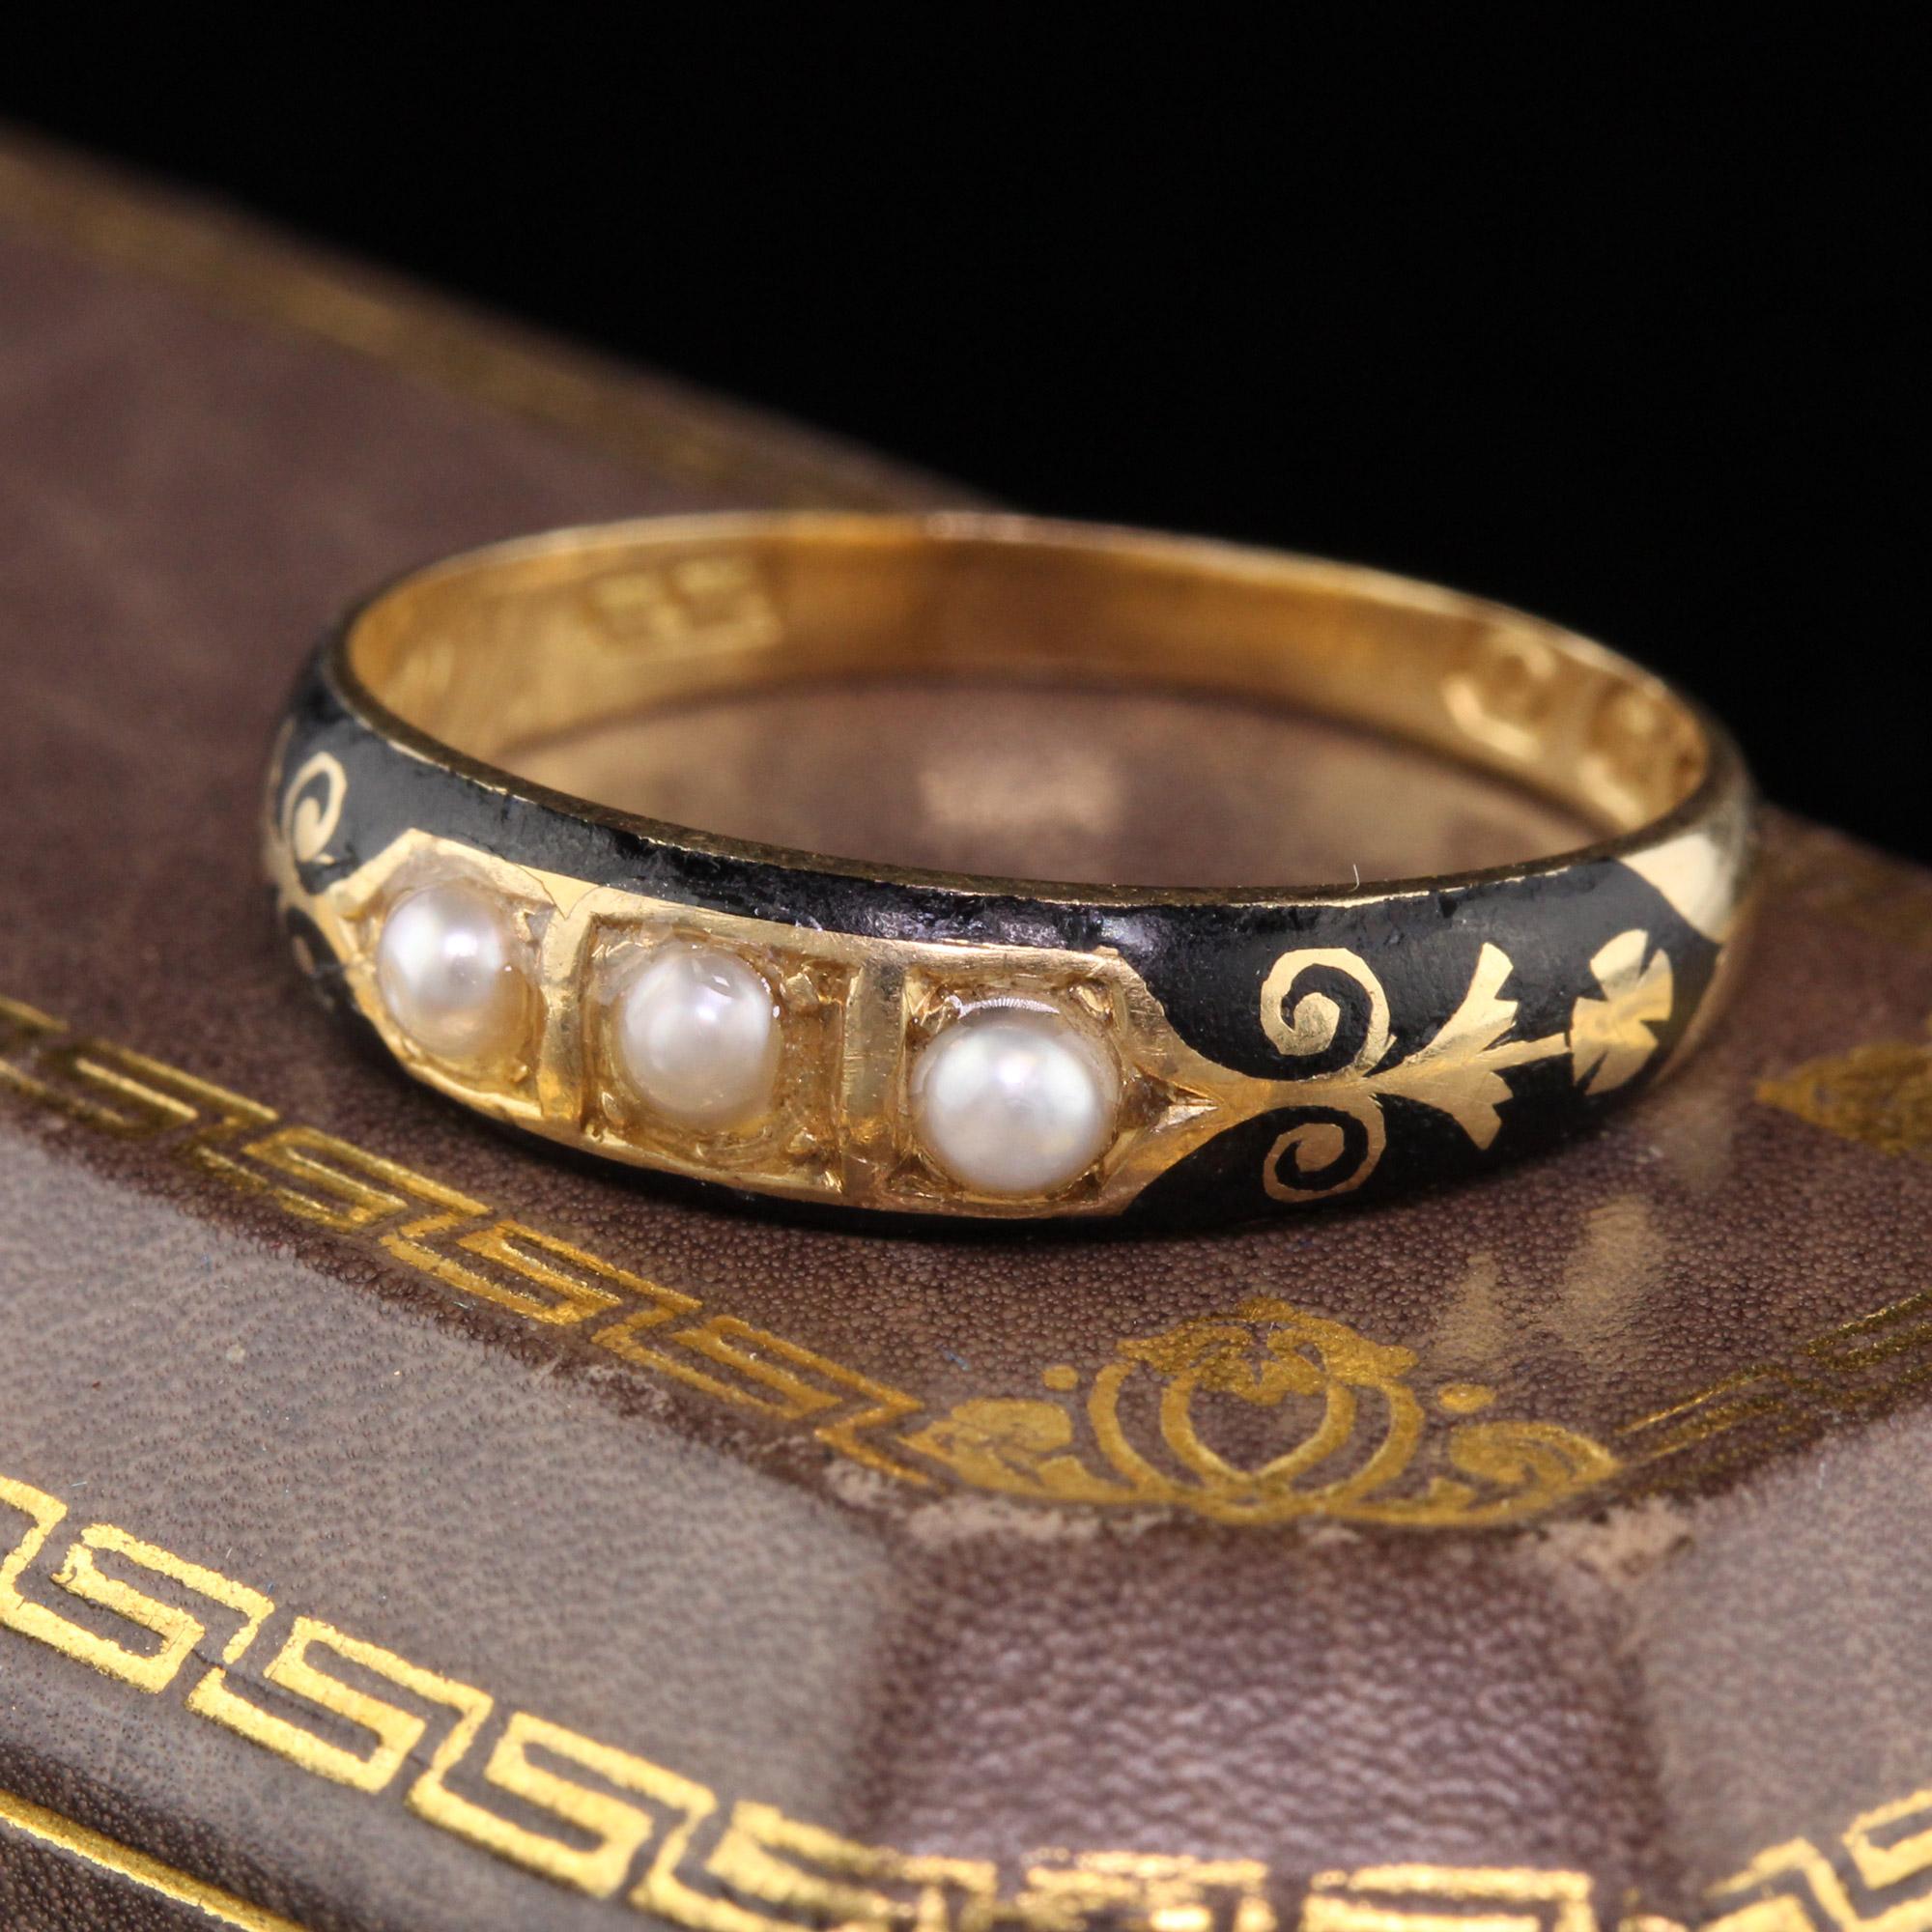 Sweet Georgian mourning ring circa 1836 in yellow gold with black enamel and 3 natural pearls. Fully engraved and hallmarked inside the shank. In excellent condition.

#R0194

Metal: 18K Yellow Gold 

Weight: 2.7 Grams

Ring Size: 7 (sizable)

This